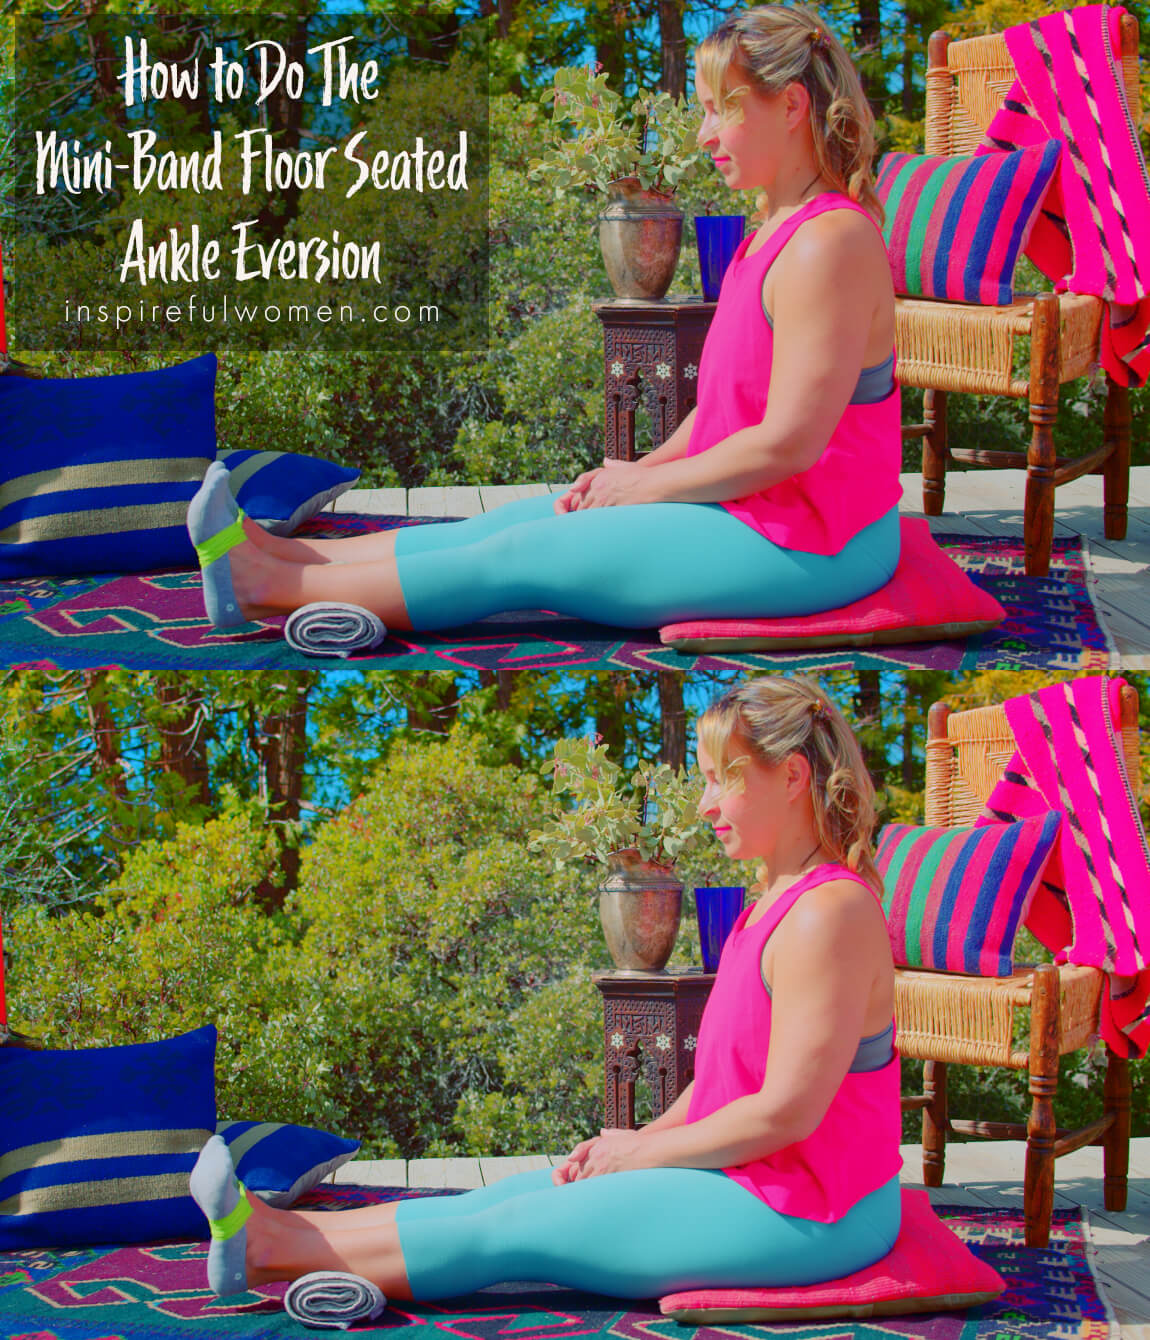 how-to-mini-band-floor-seated-ankle-eversion-lower-leg-workout-proper-form